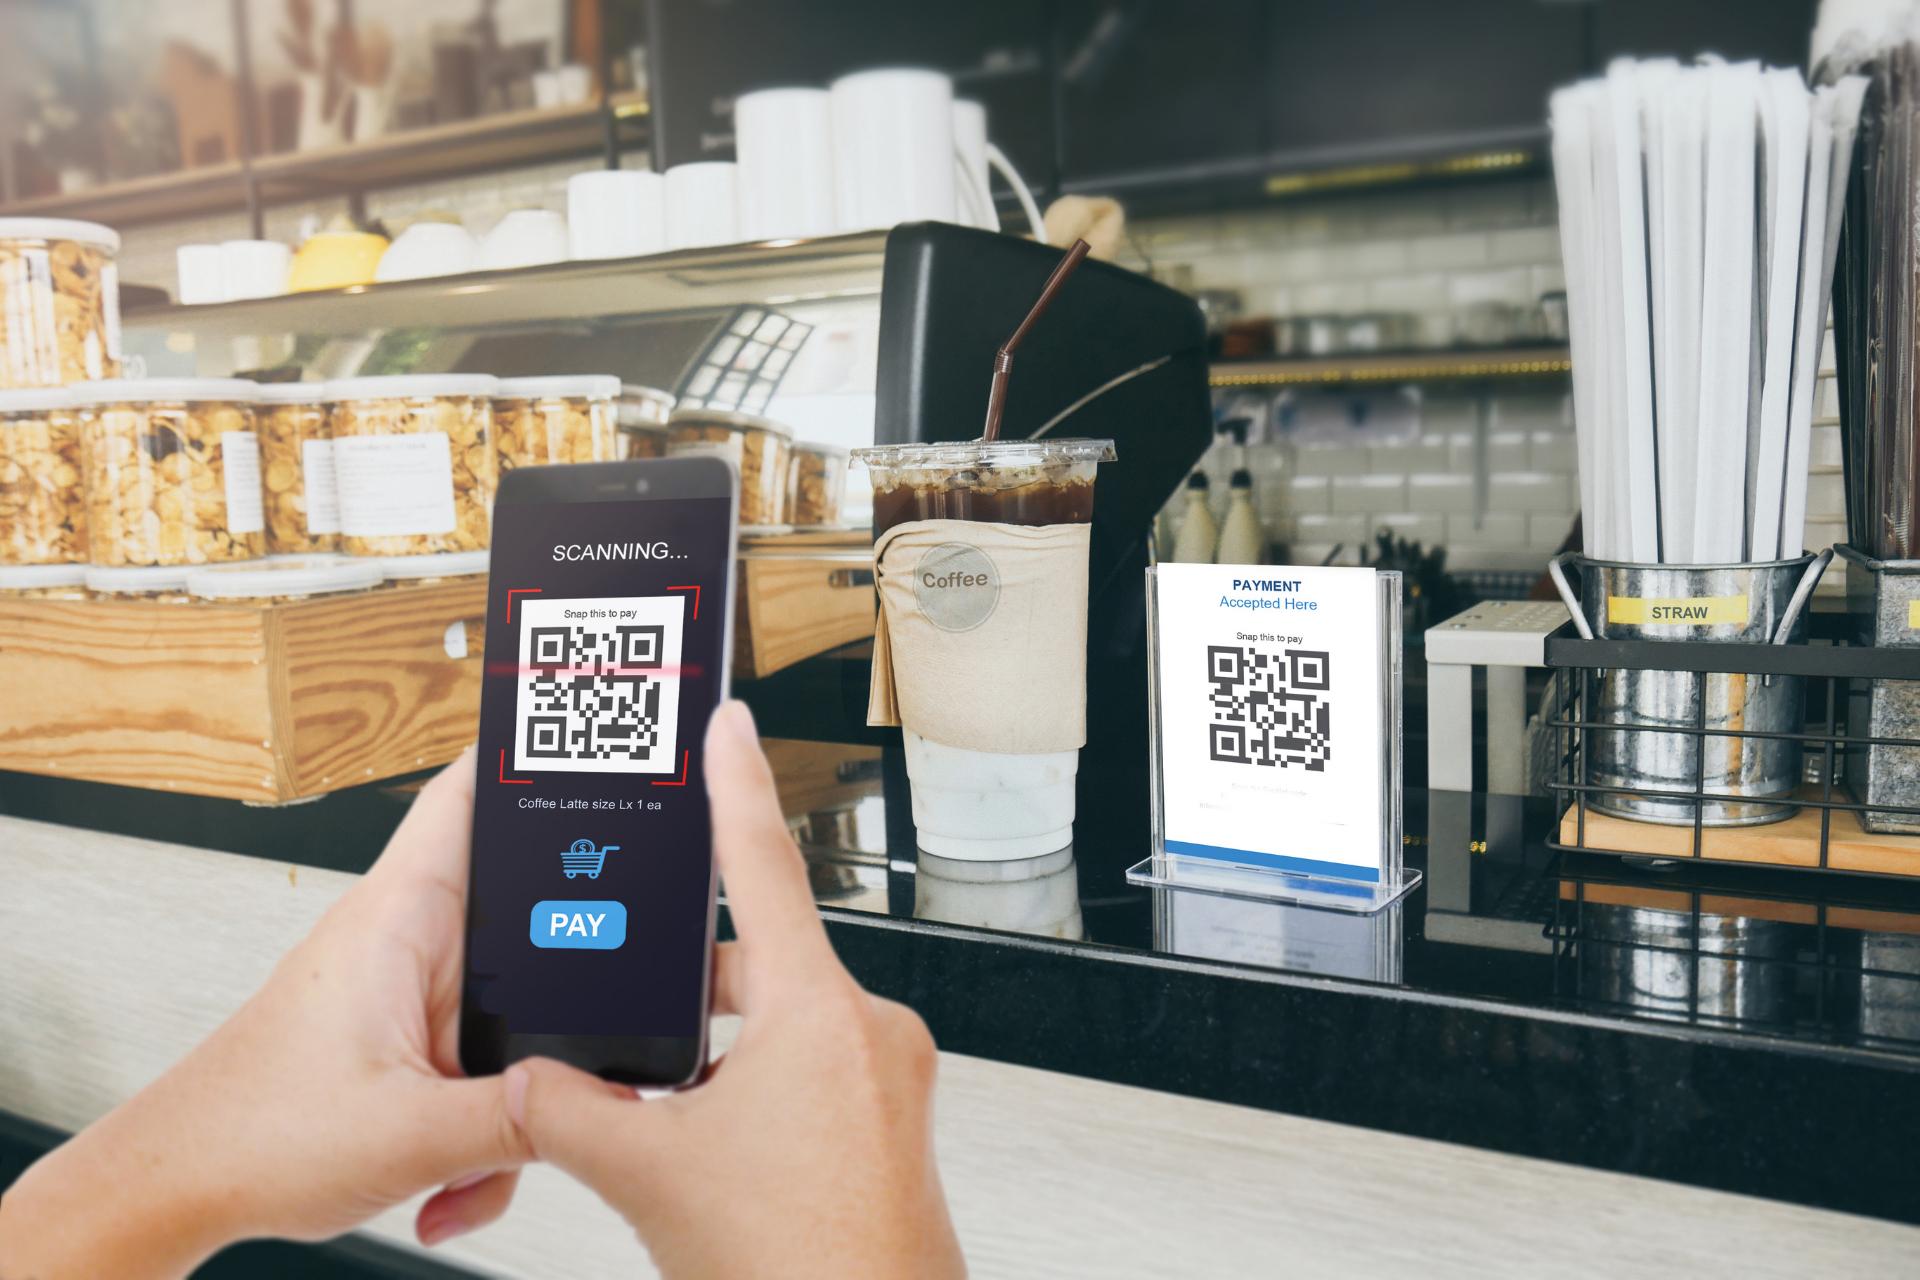 Scanning QR code to pay in restaurant